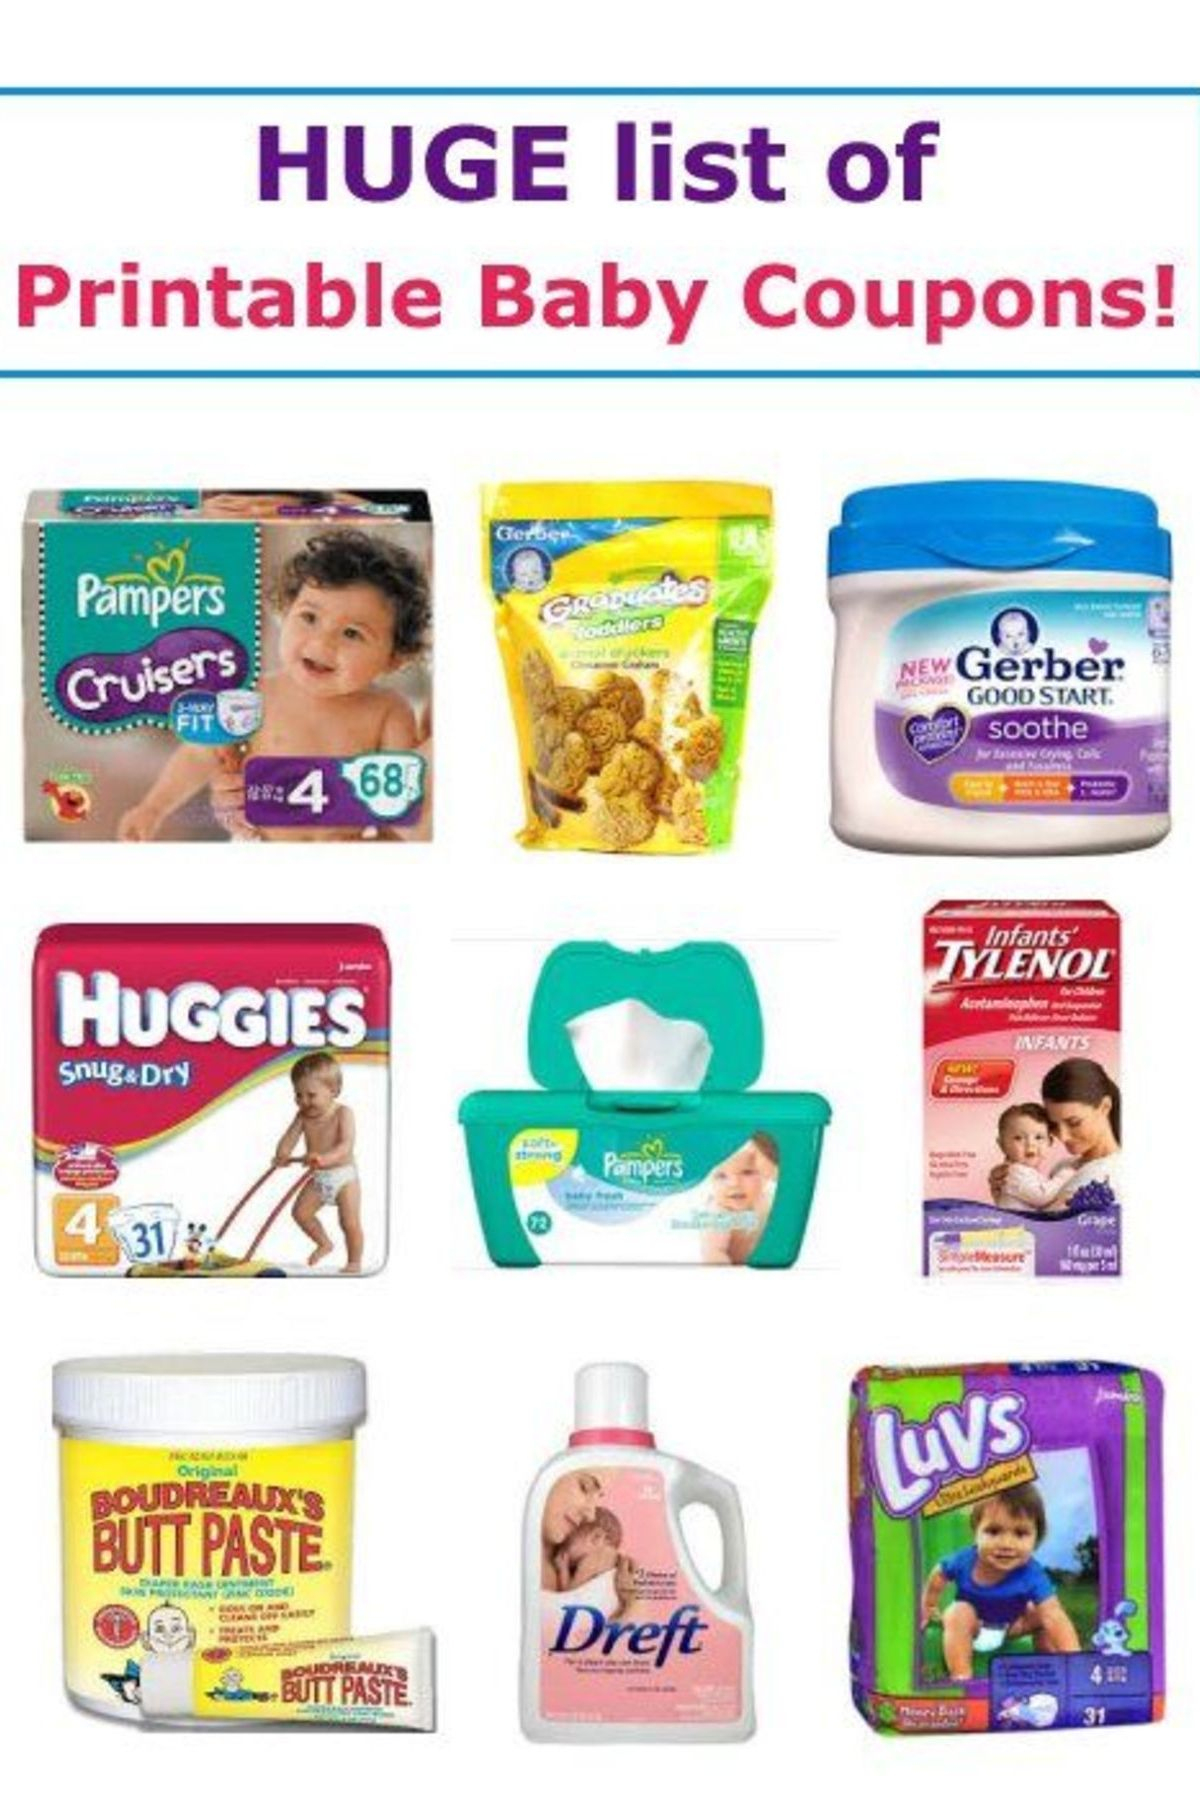 17 Printable Baby Coupons | Baby On A Budget | Baby Coupons, Baby - Free Printable Coupons For Baby Diapers